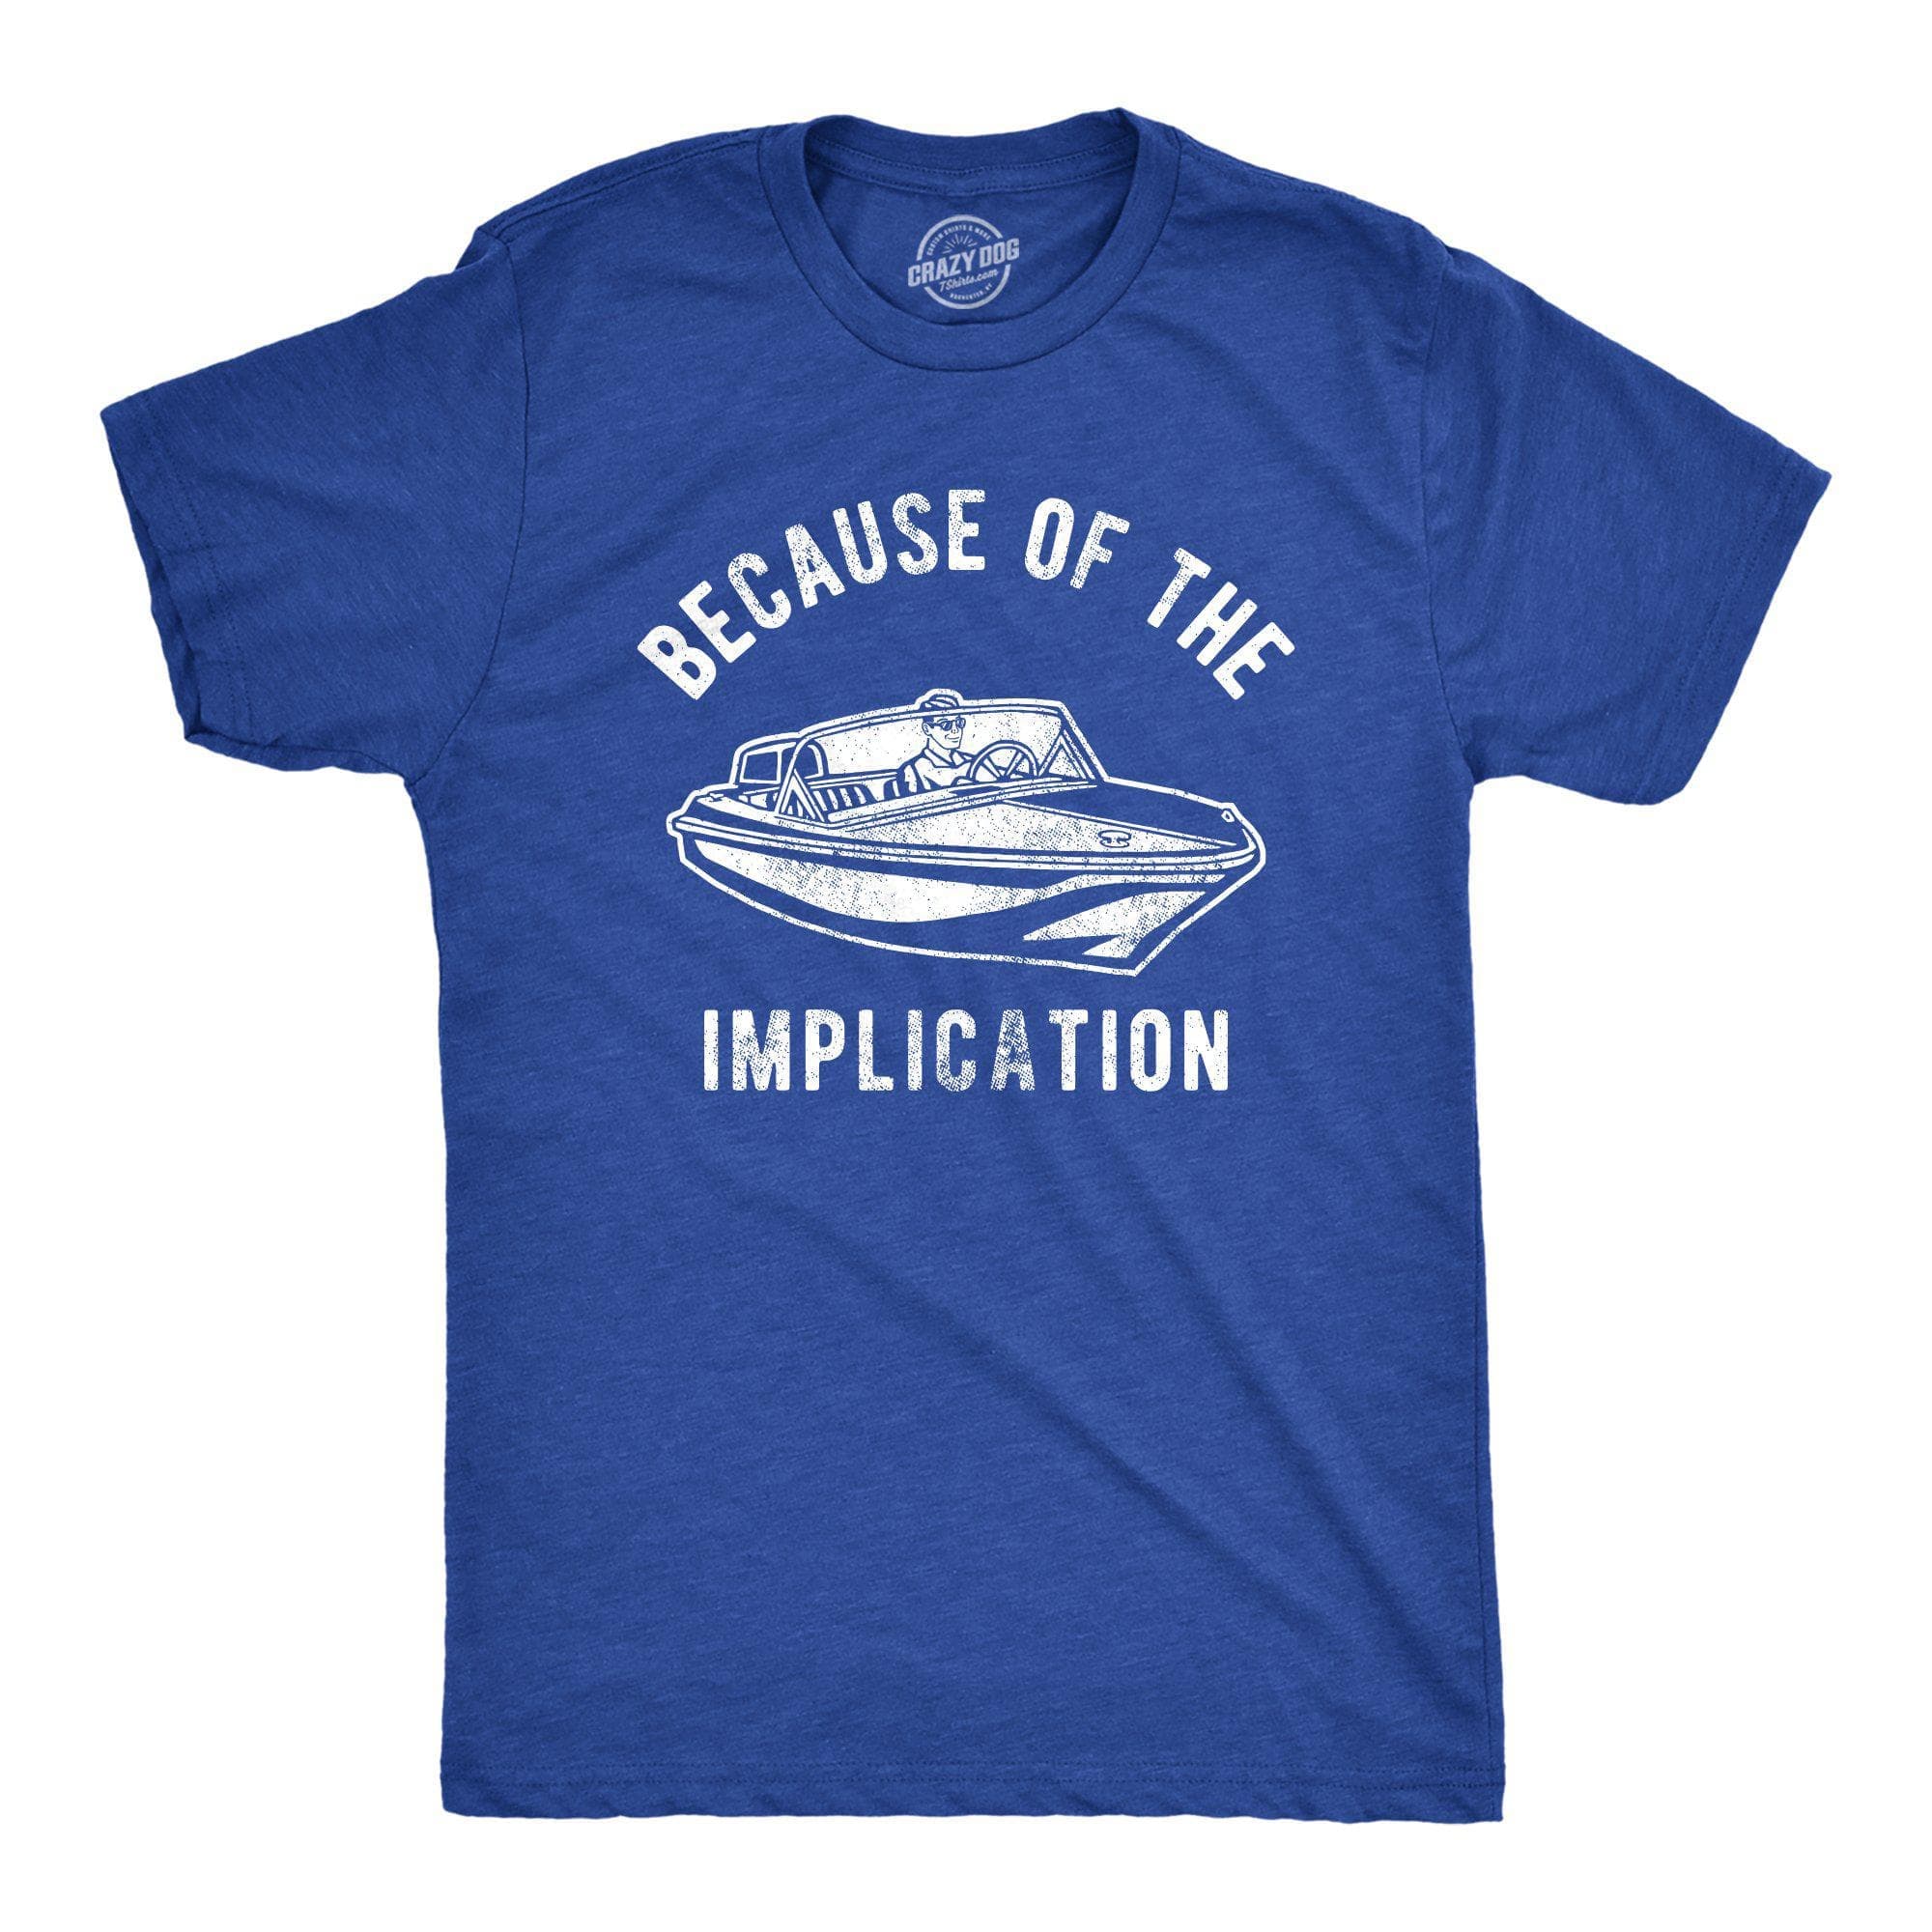 Because Of The Implication Men's Tshirt - Crazy Dog T-Shirts